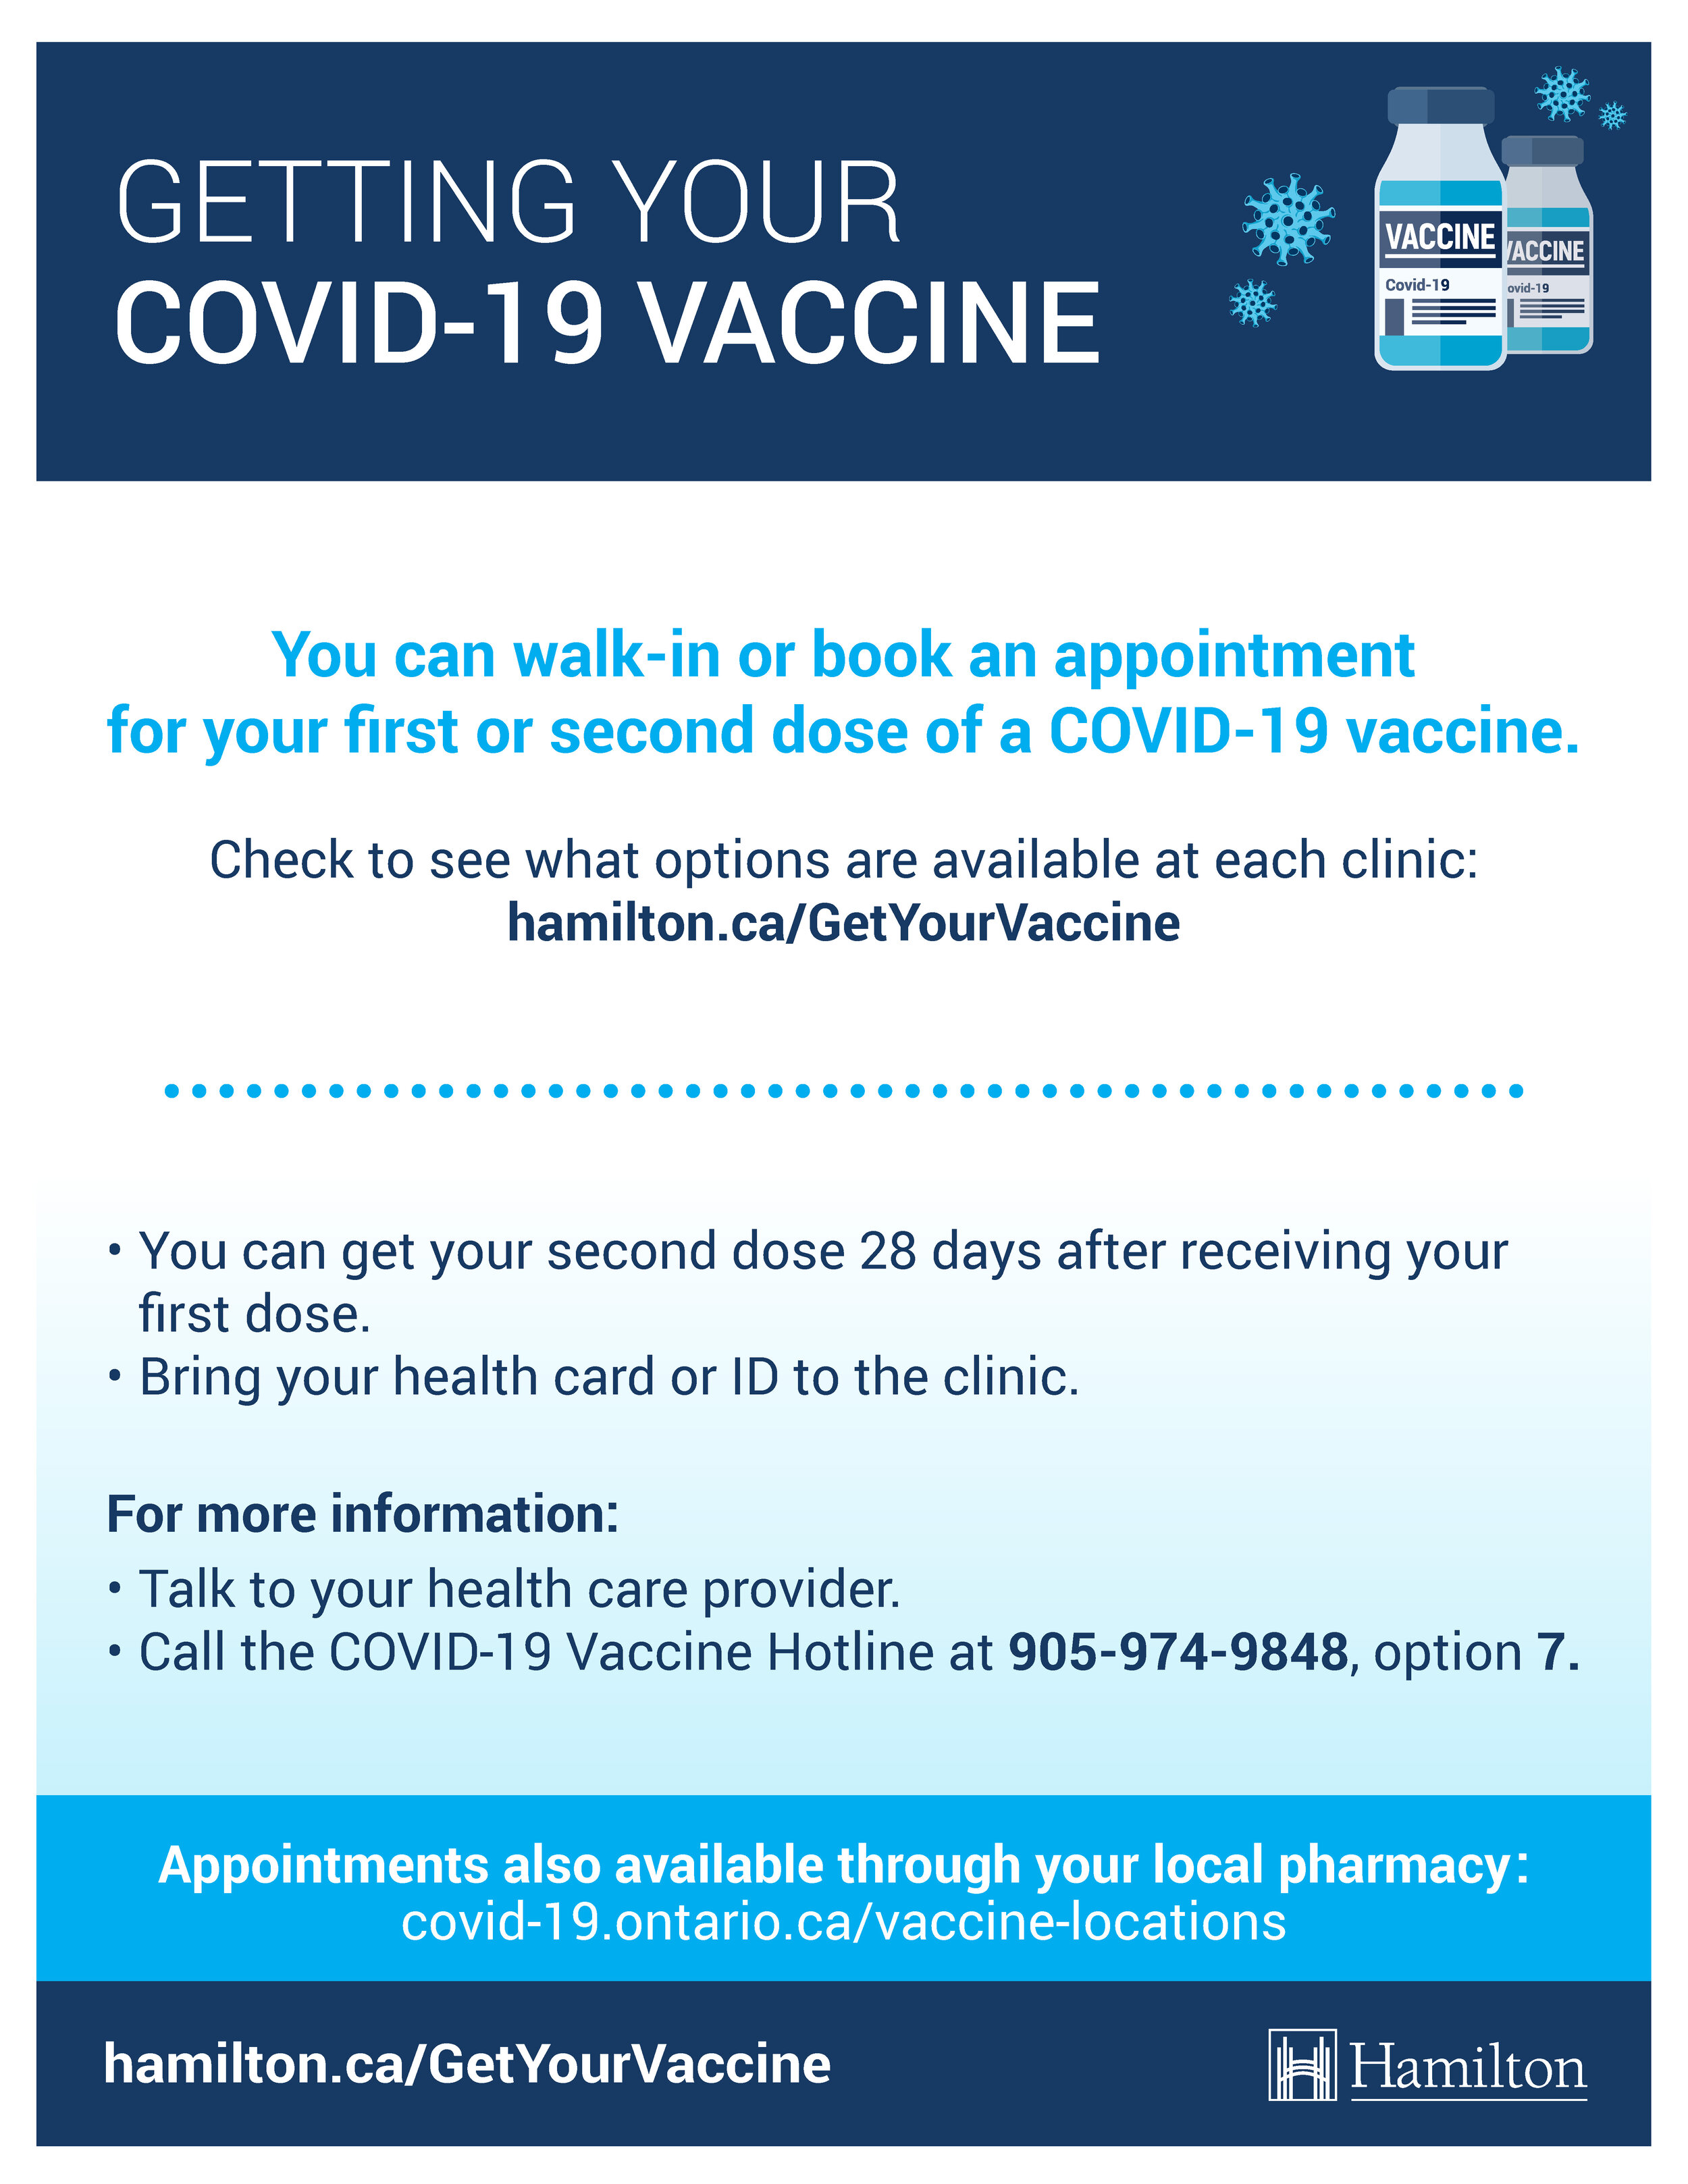 covid-19-booking-your-vaccine-poster-july20-21.jpg